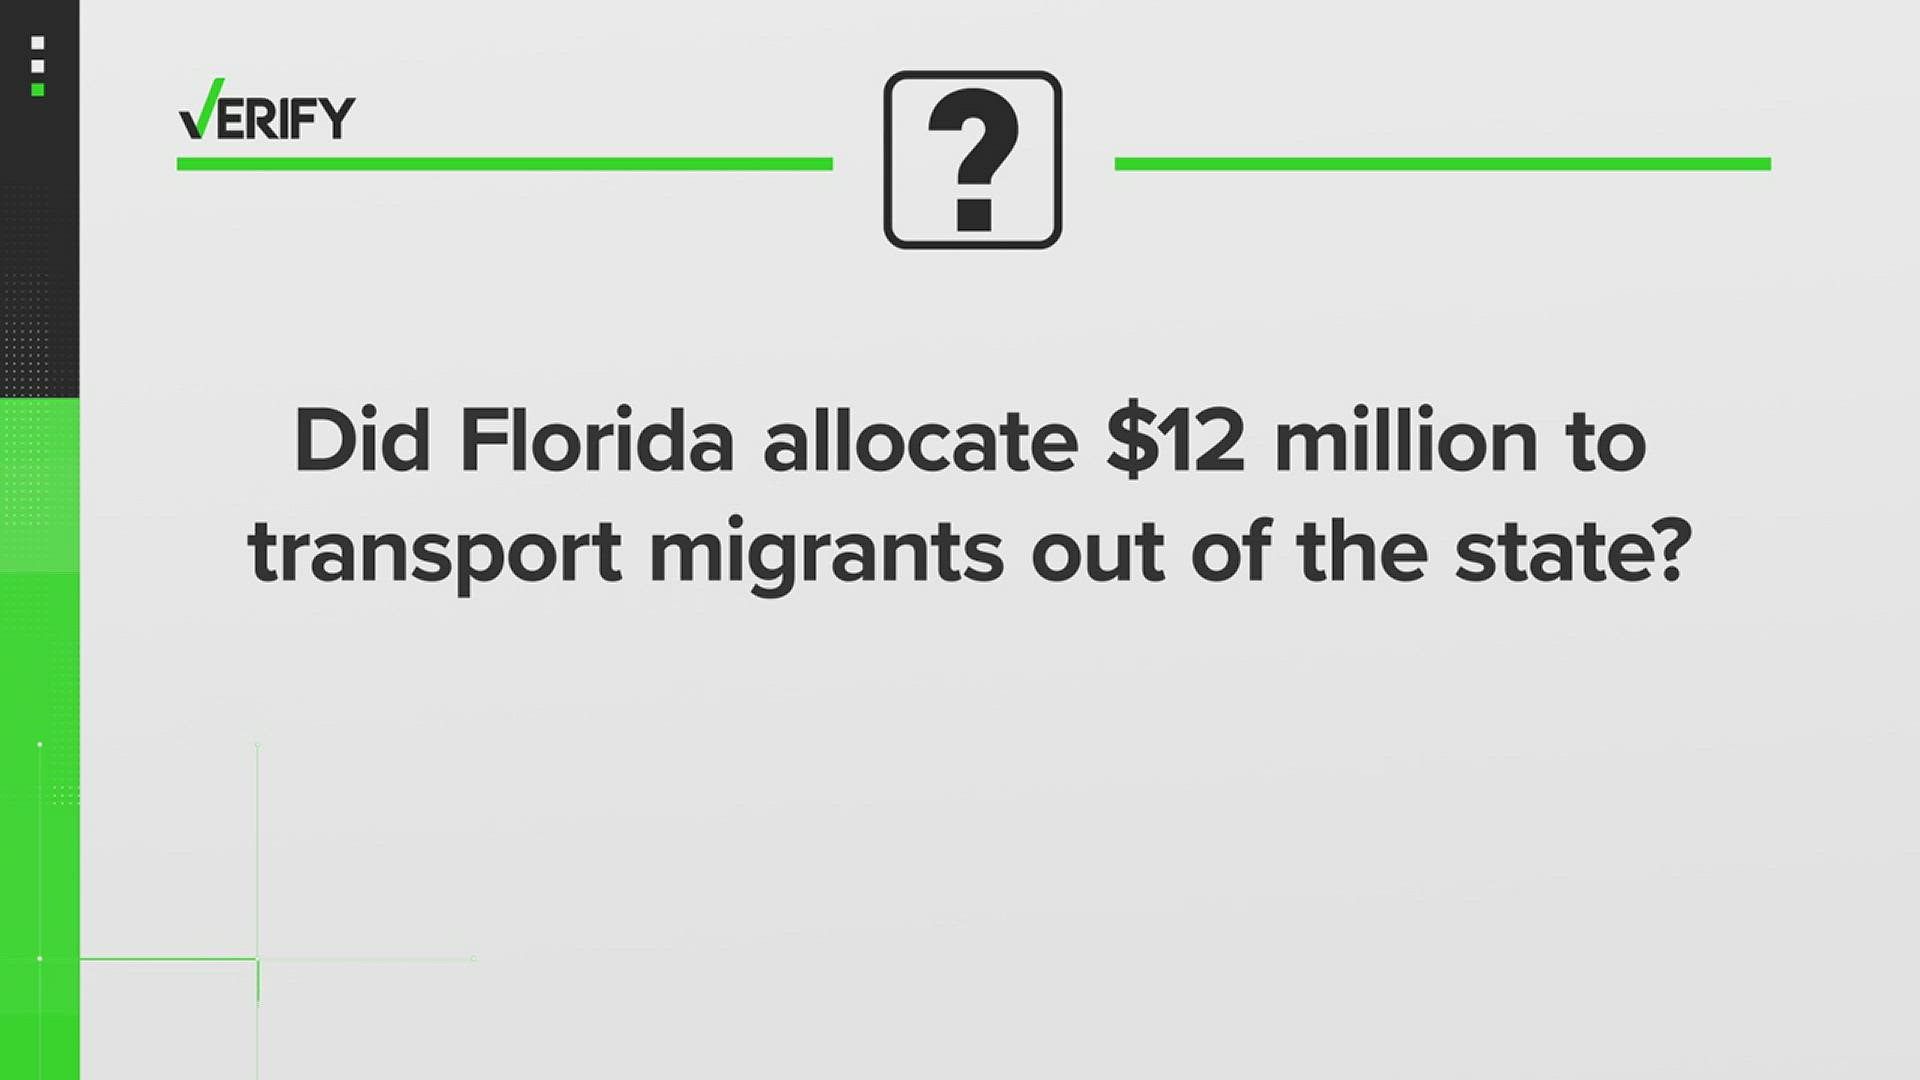 Florida’s Freedom First Budget included $12 million for a program to “transport unauthorized aliens” out of the state, including locations such as Martha’s Vineyard.